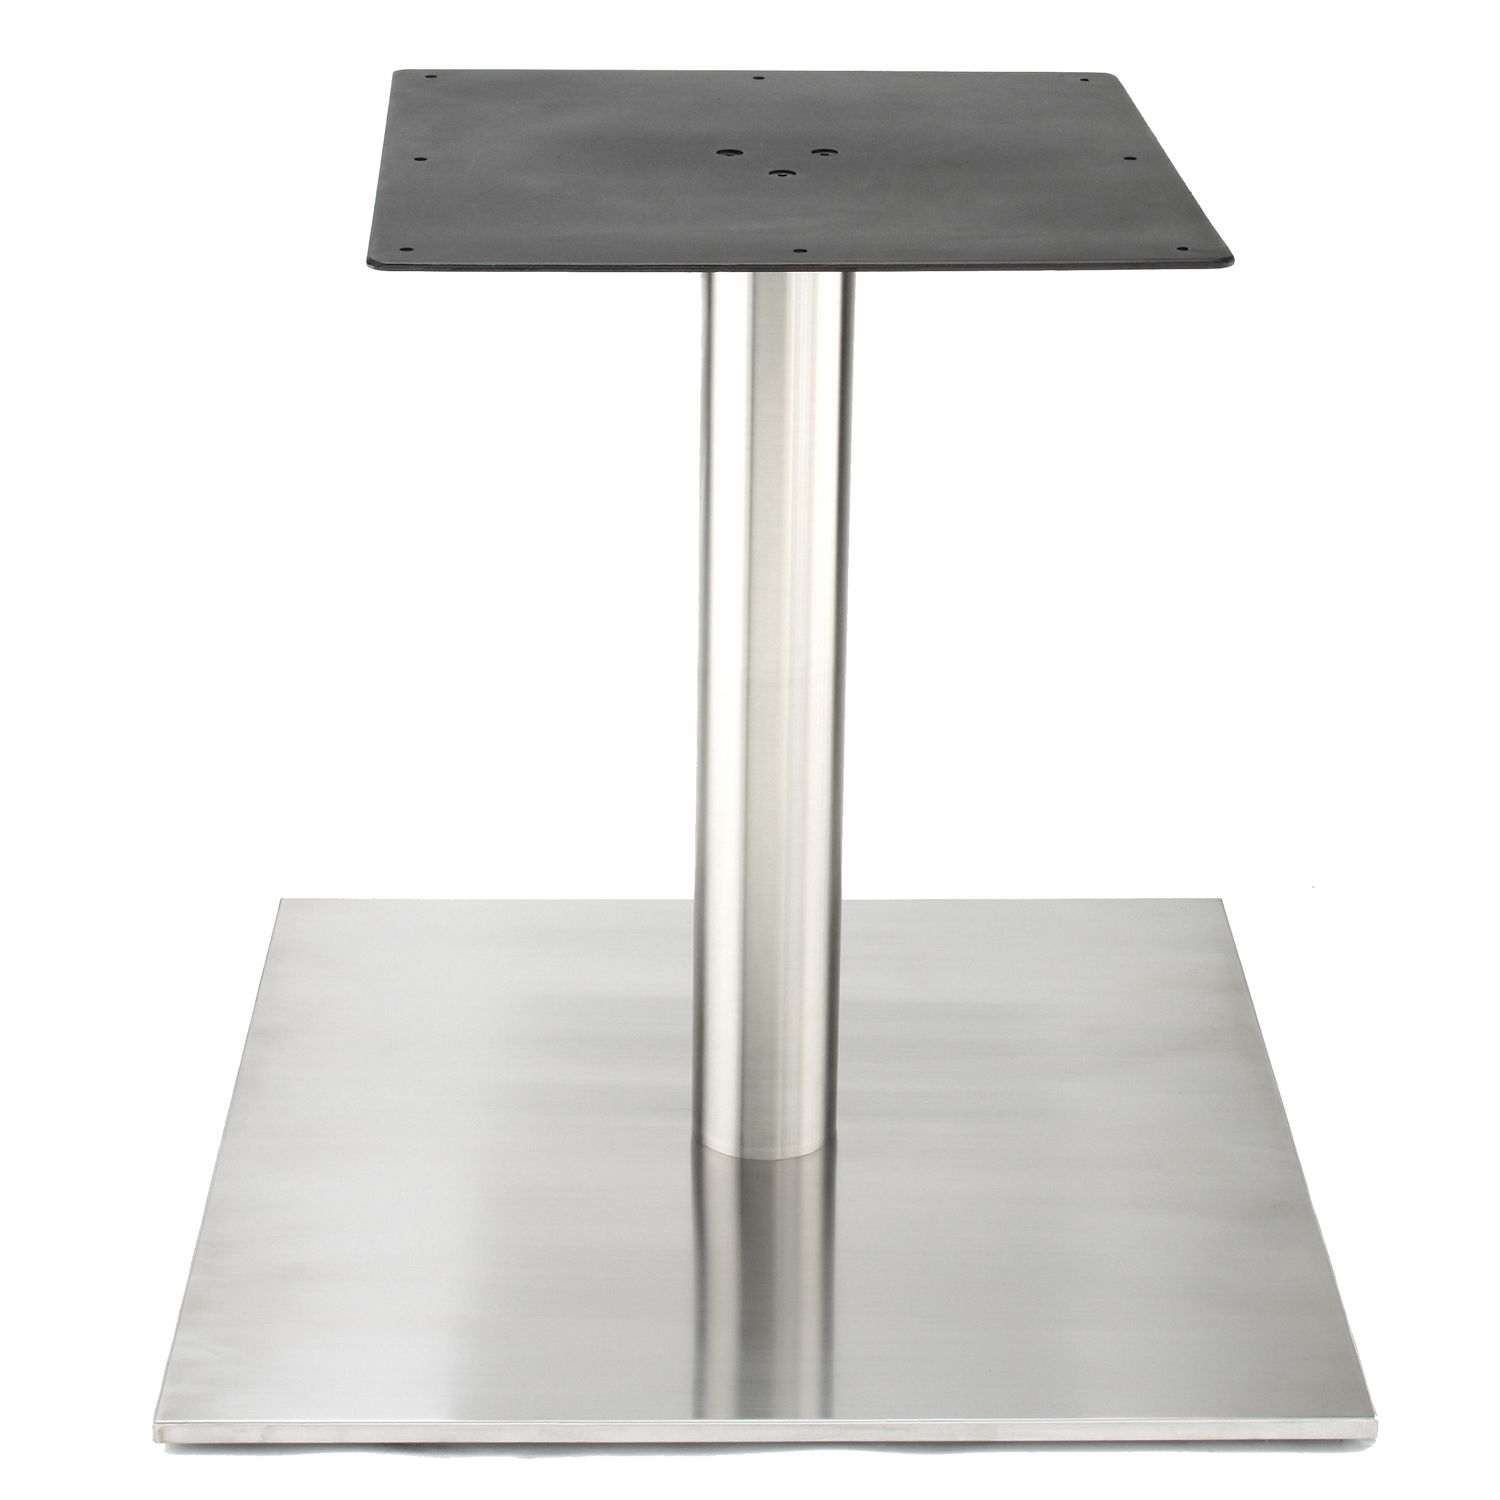 RSQ750 Stainless Steel Table Base